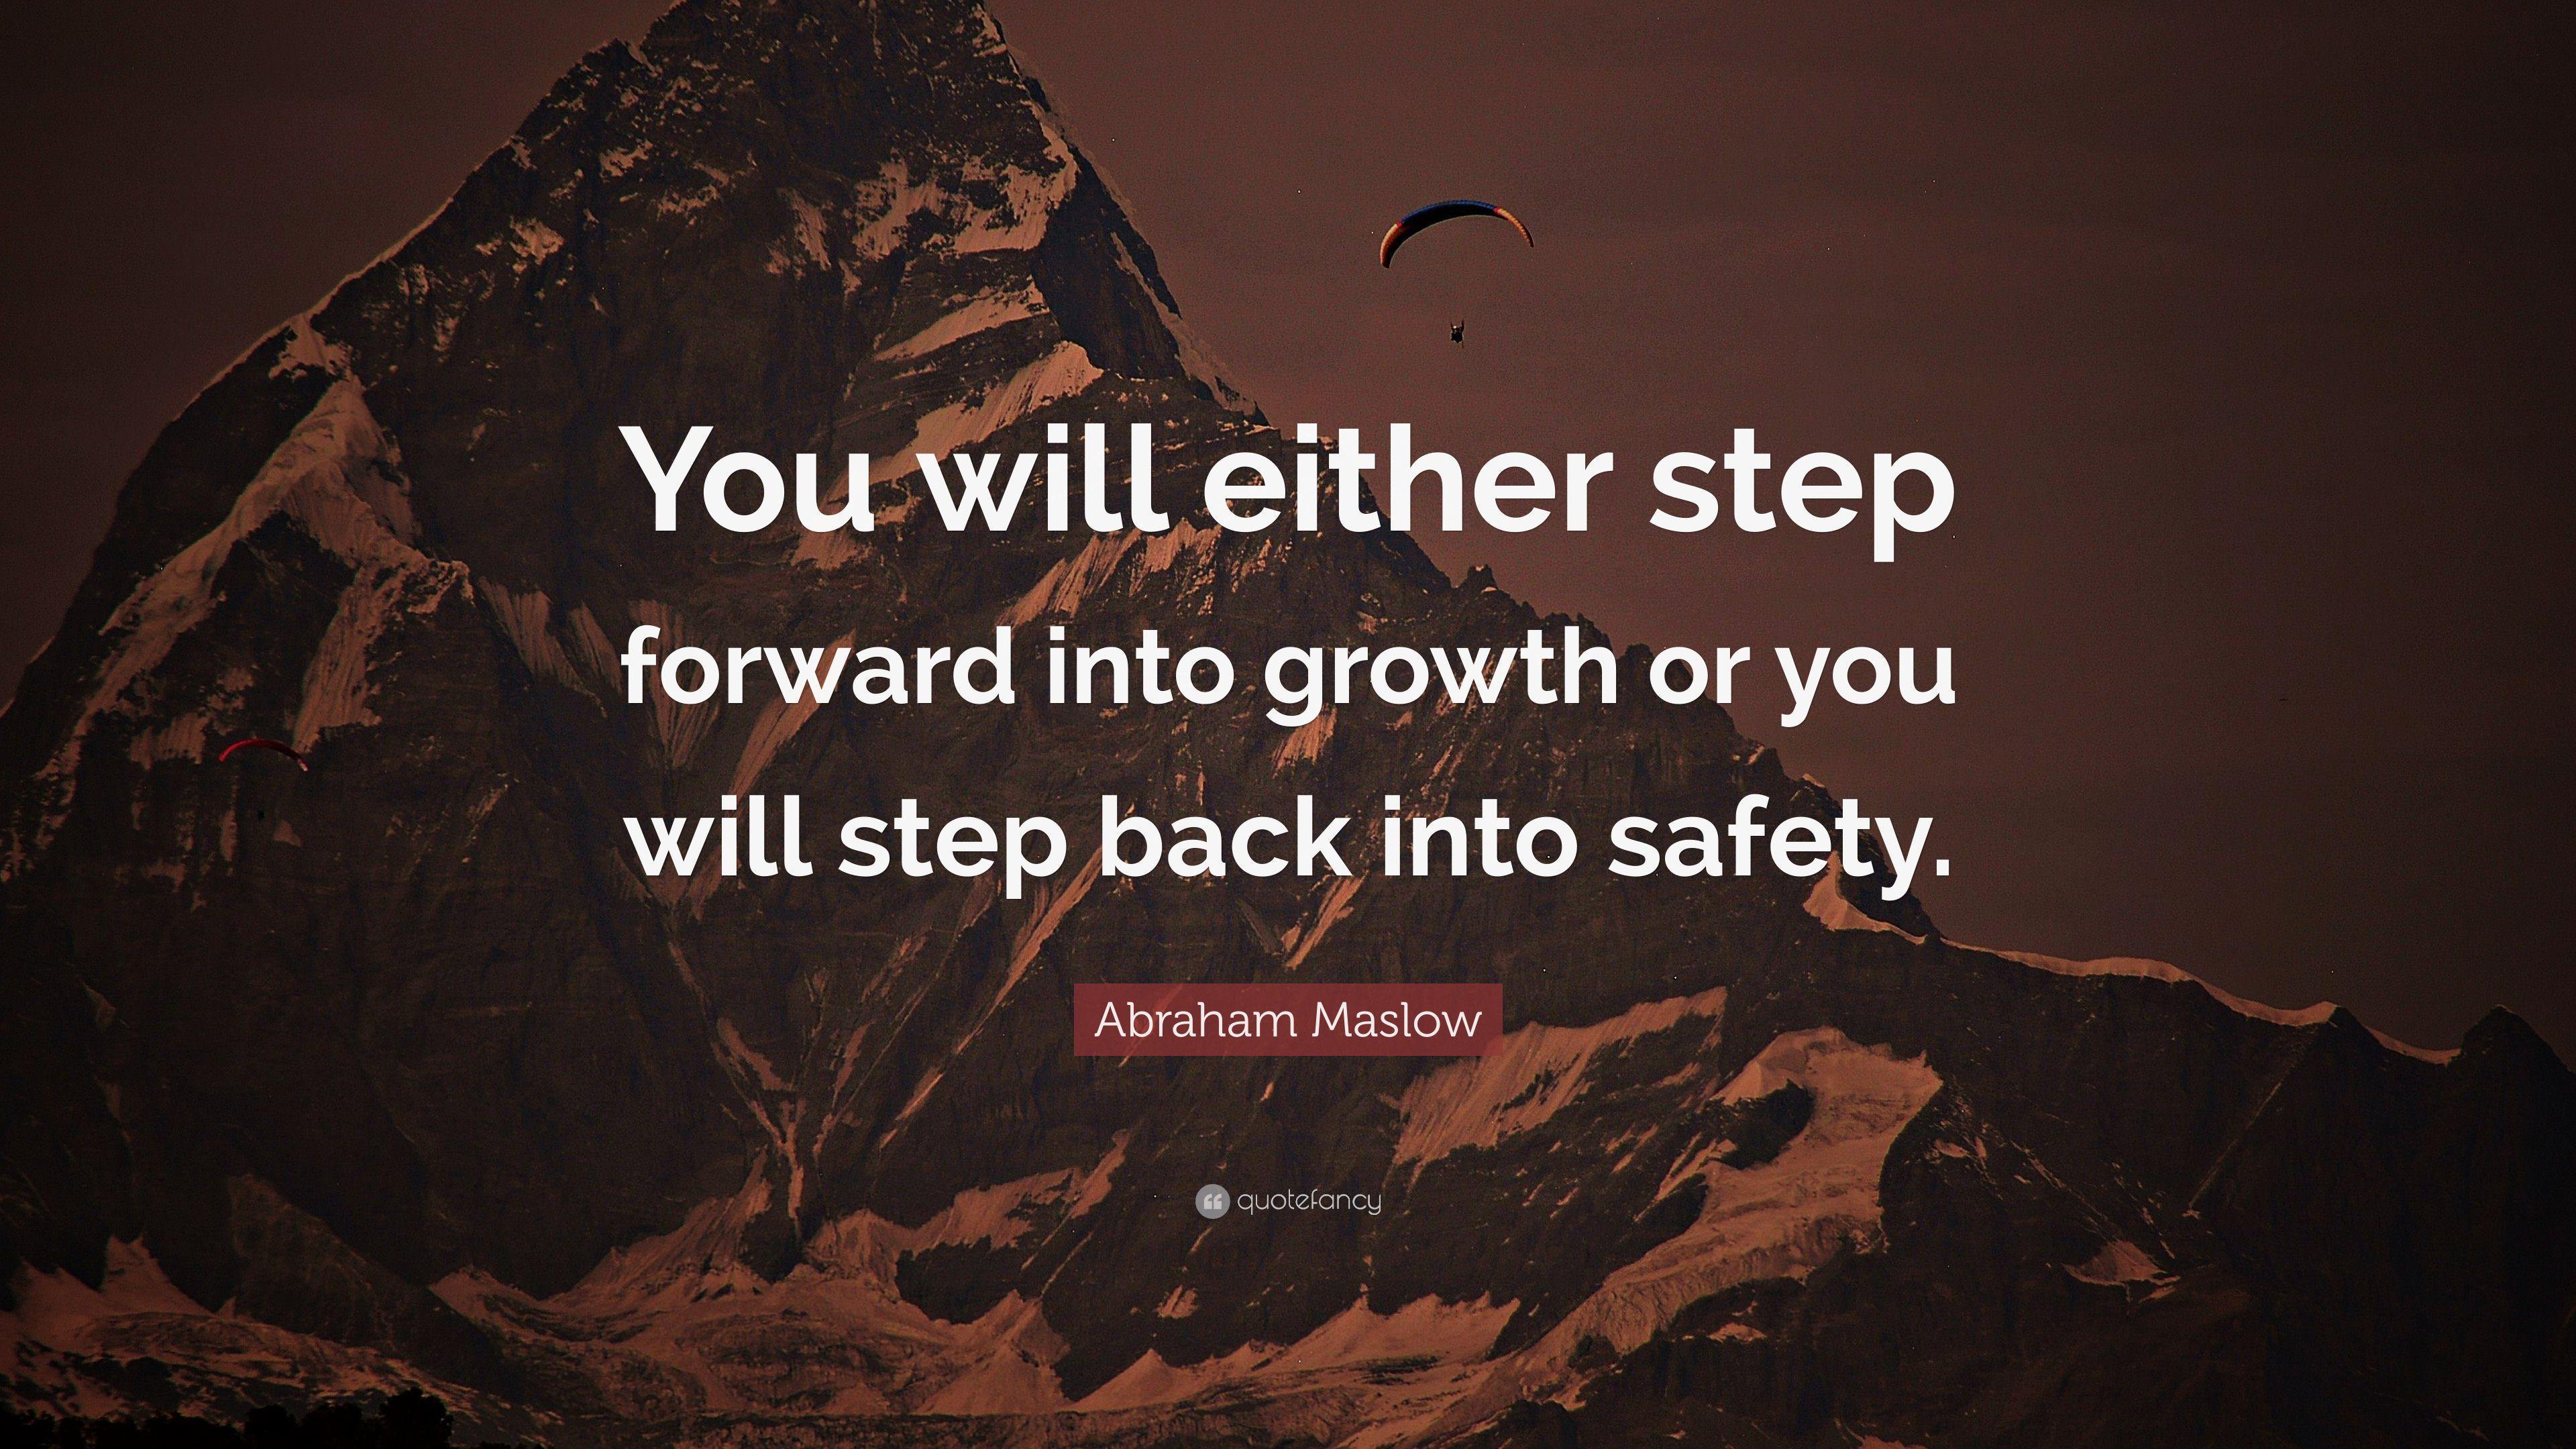 Abraham Maslow Quote: “You will either step forward into growth or